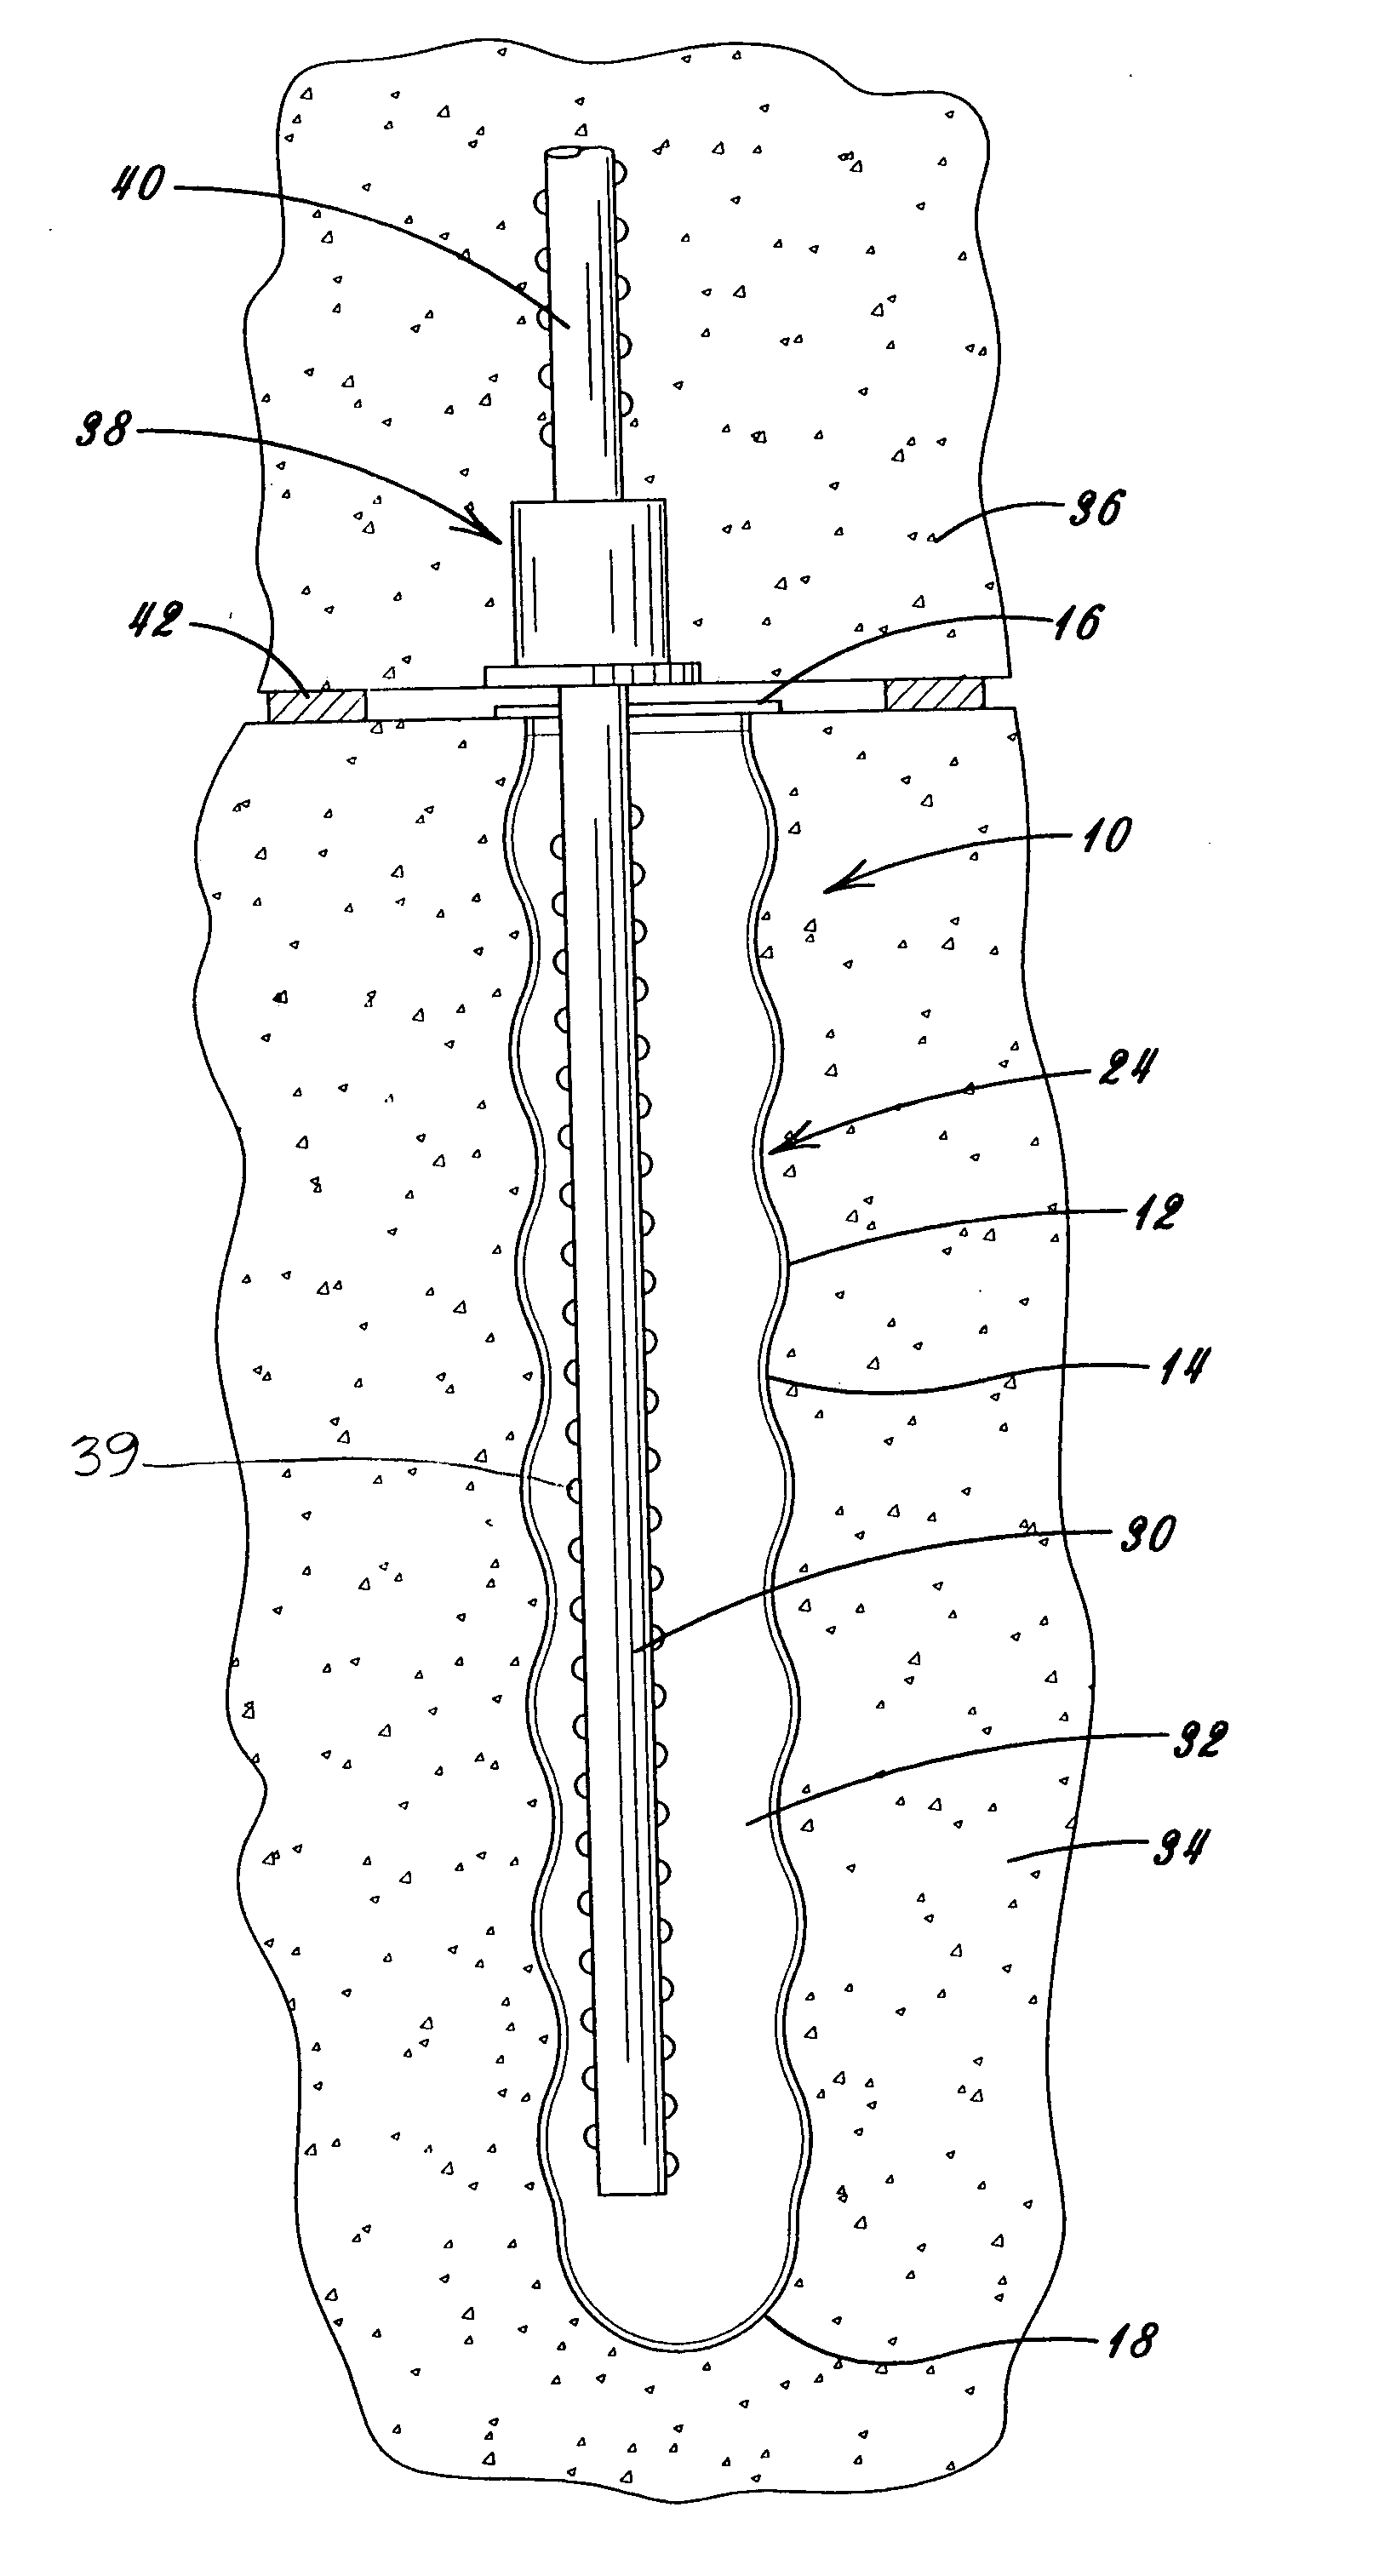 Ovalized concrete block-out tube with tear away nailing flange